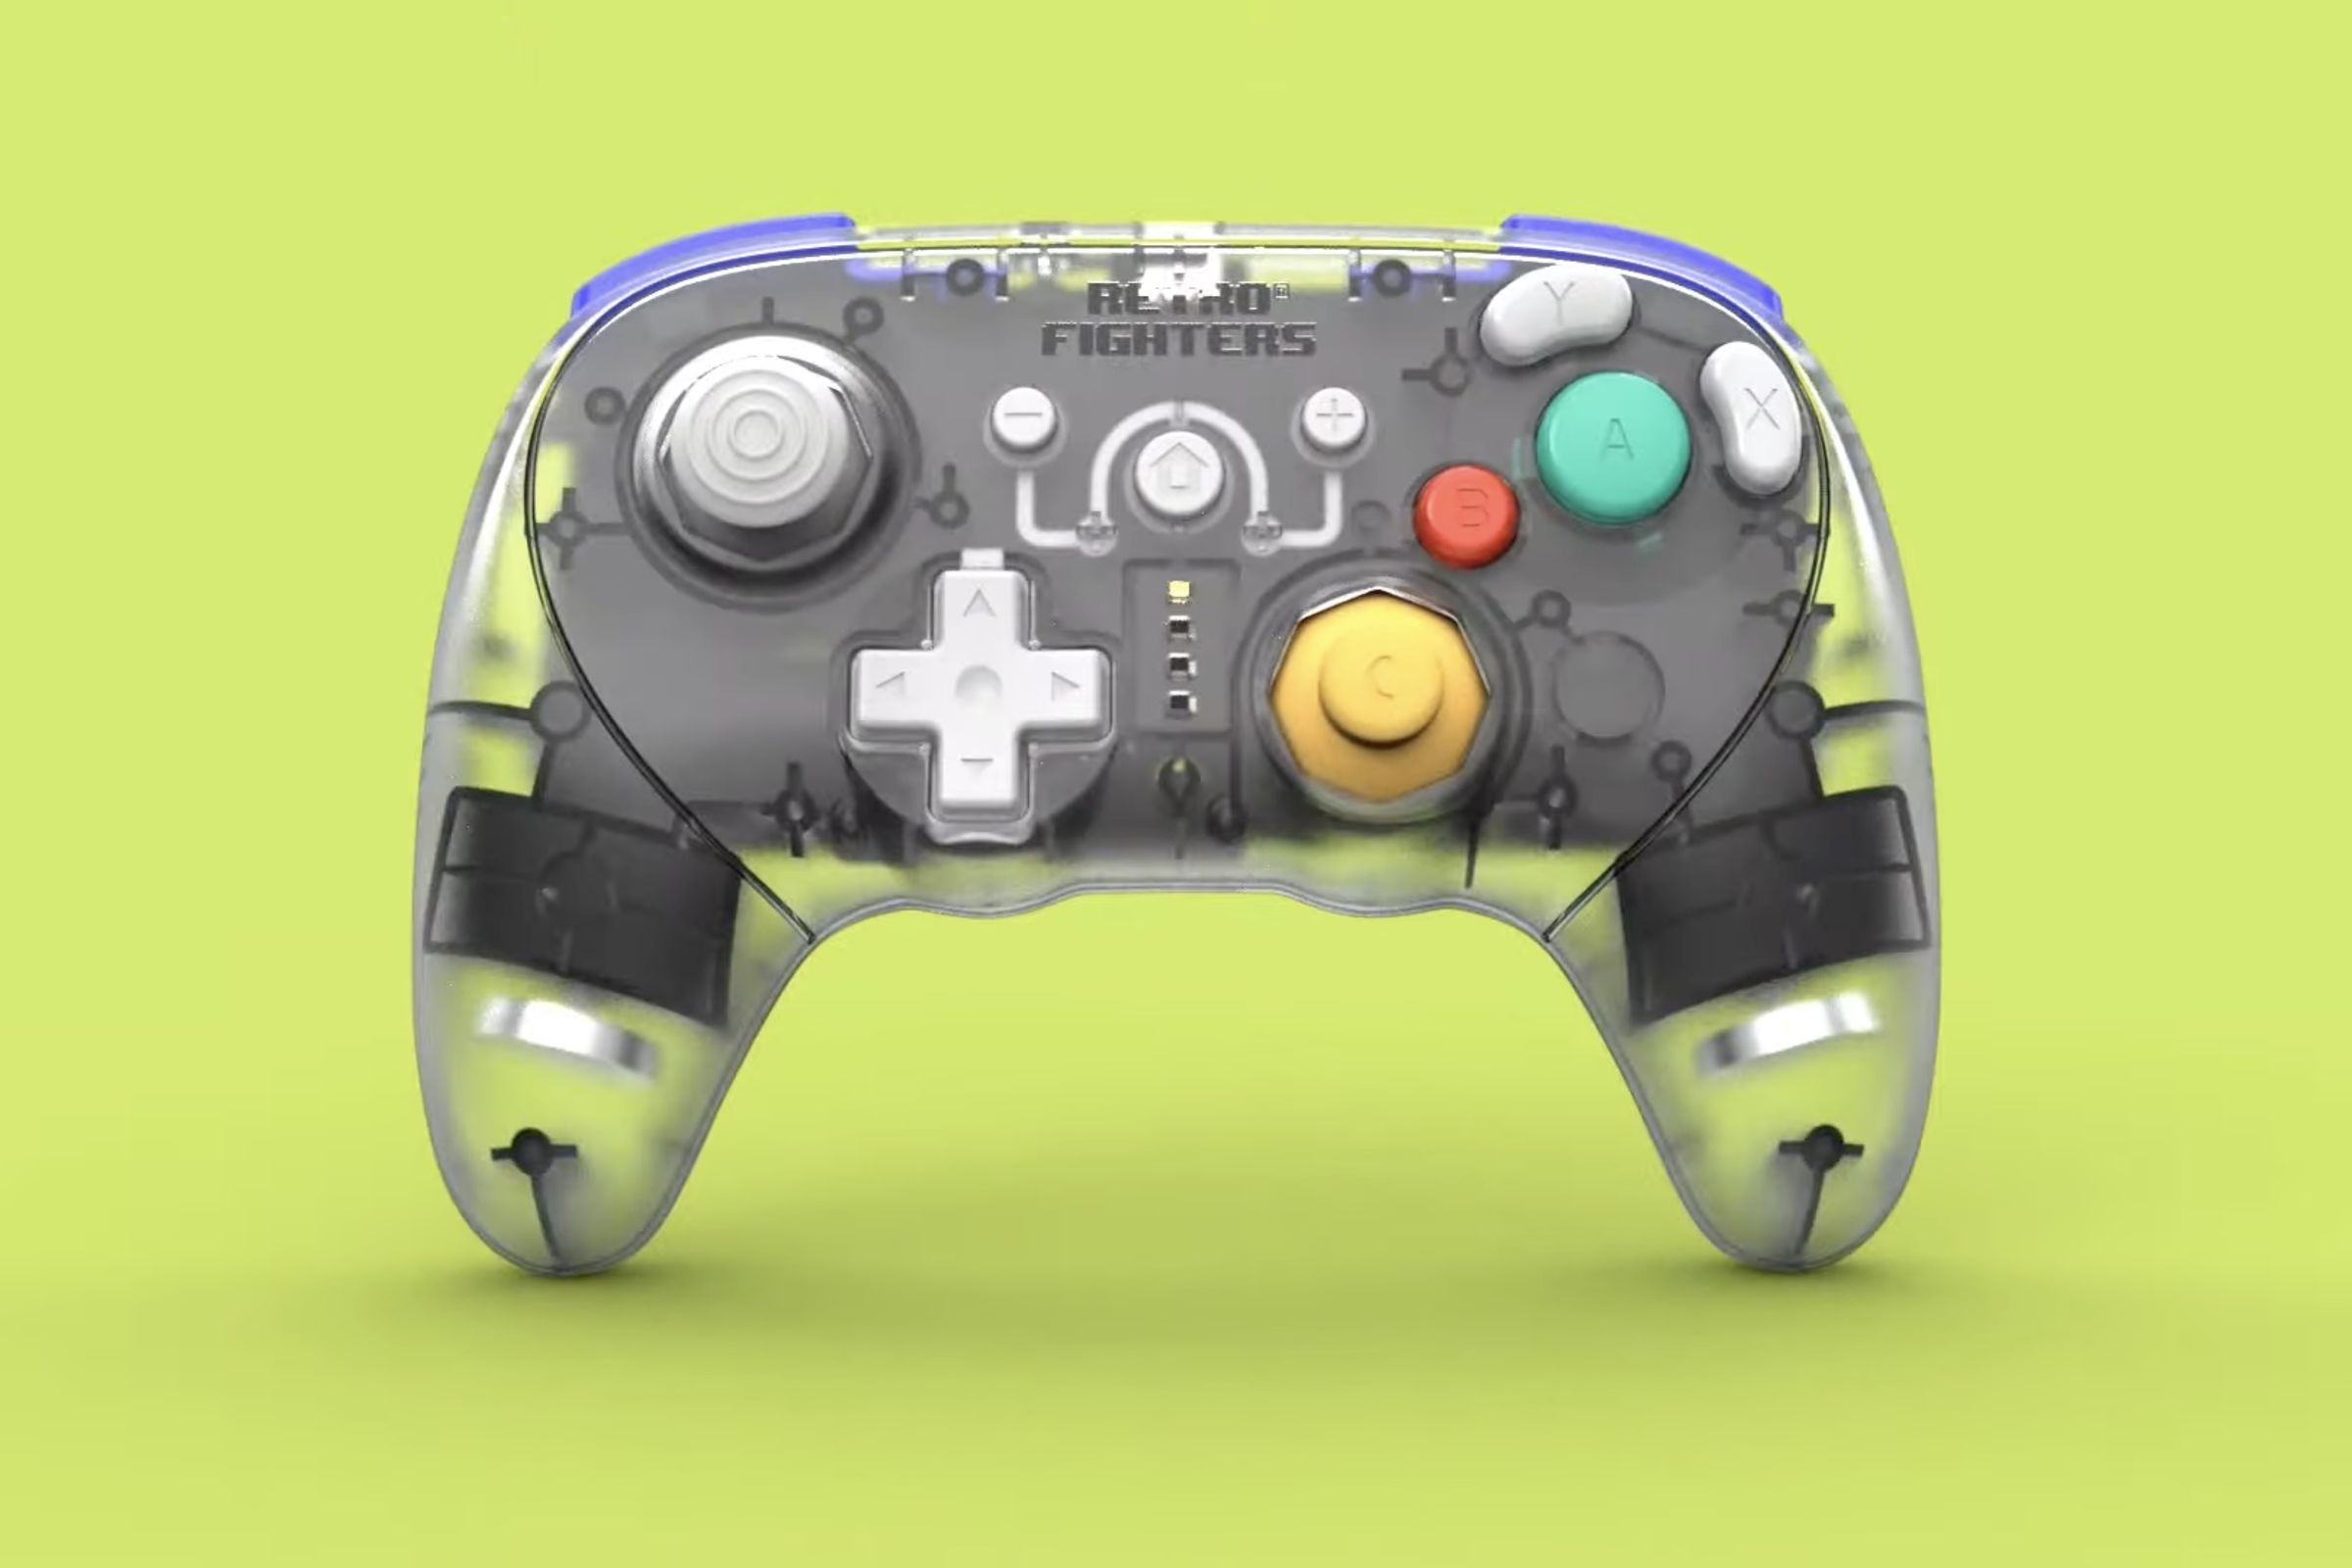 GameCube-style controller with a clear plastic shell, LEDs down the middle to show player number, Retro Fighters text logo, symmetrical triggers and a familiar yellow C stick nub.